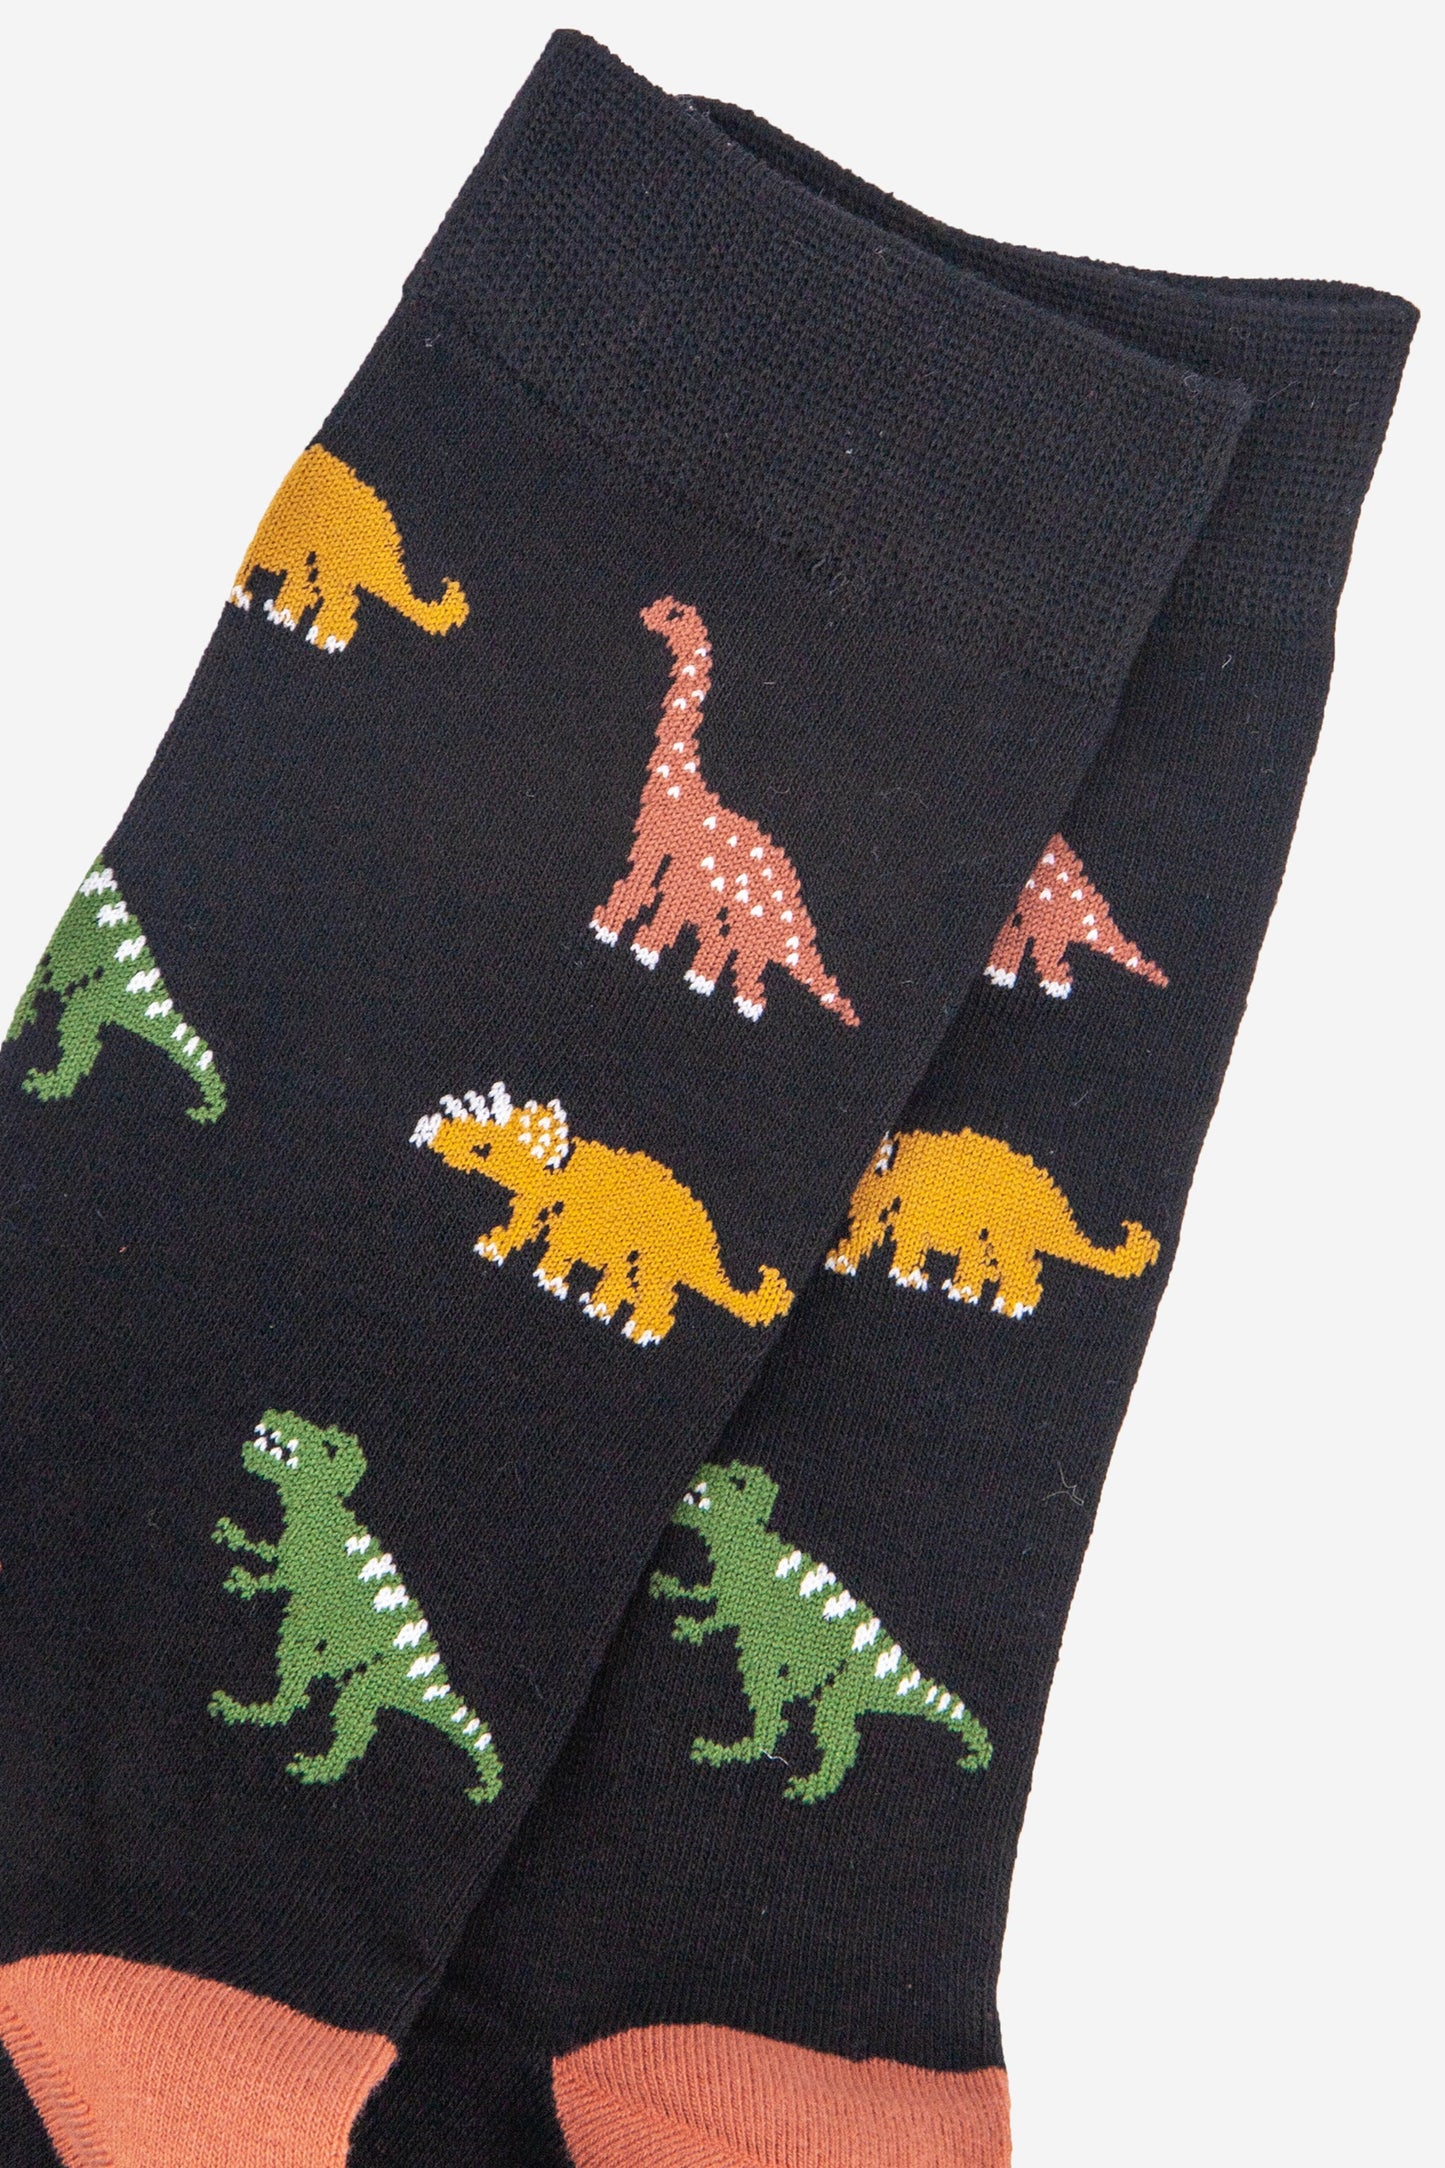 close up of the dino print pattern on the socks